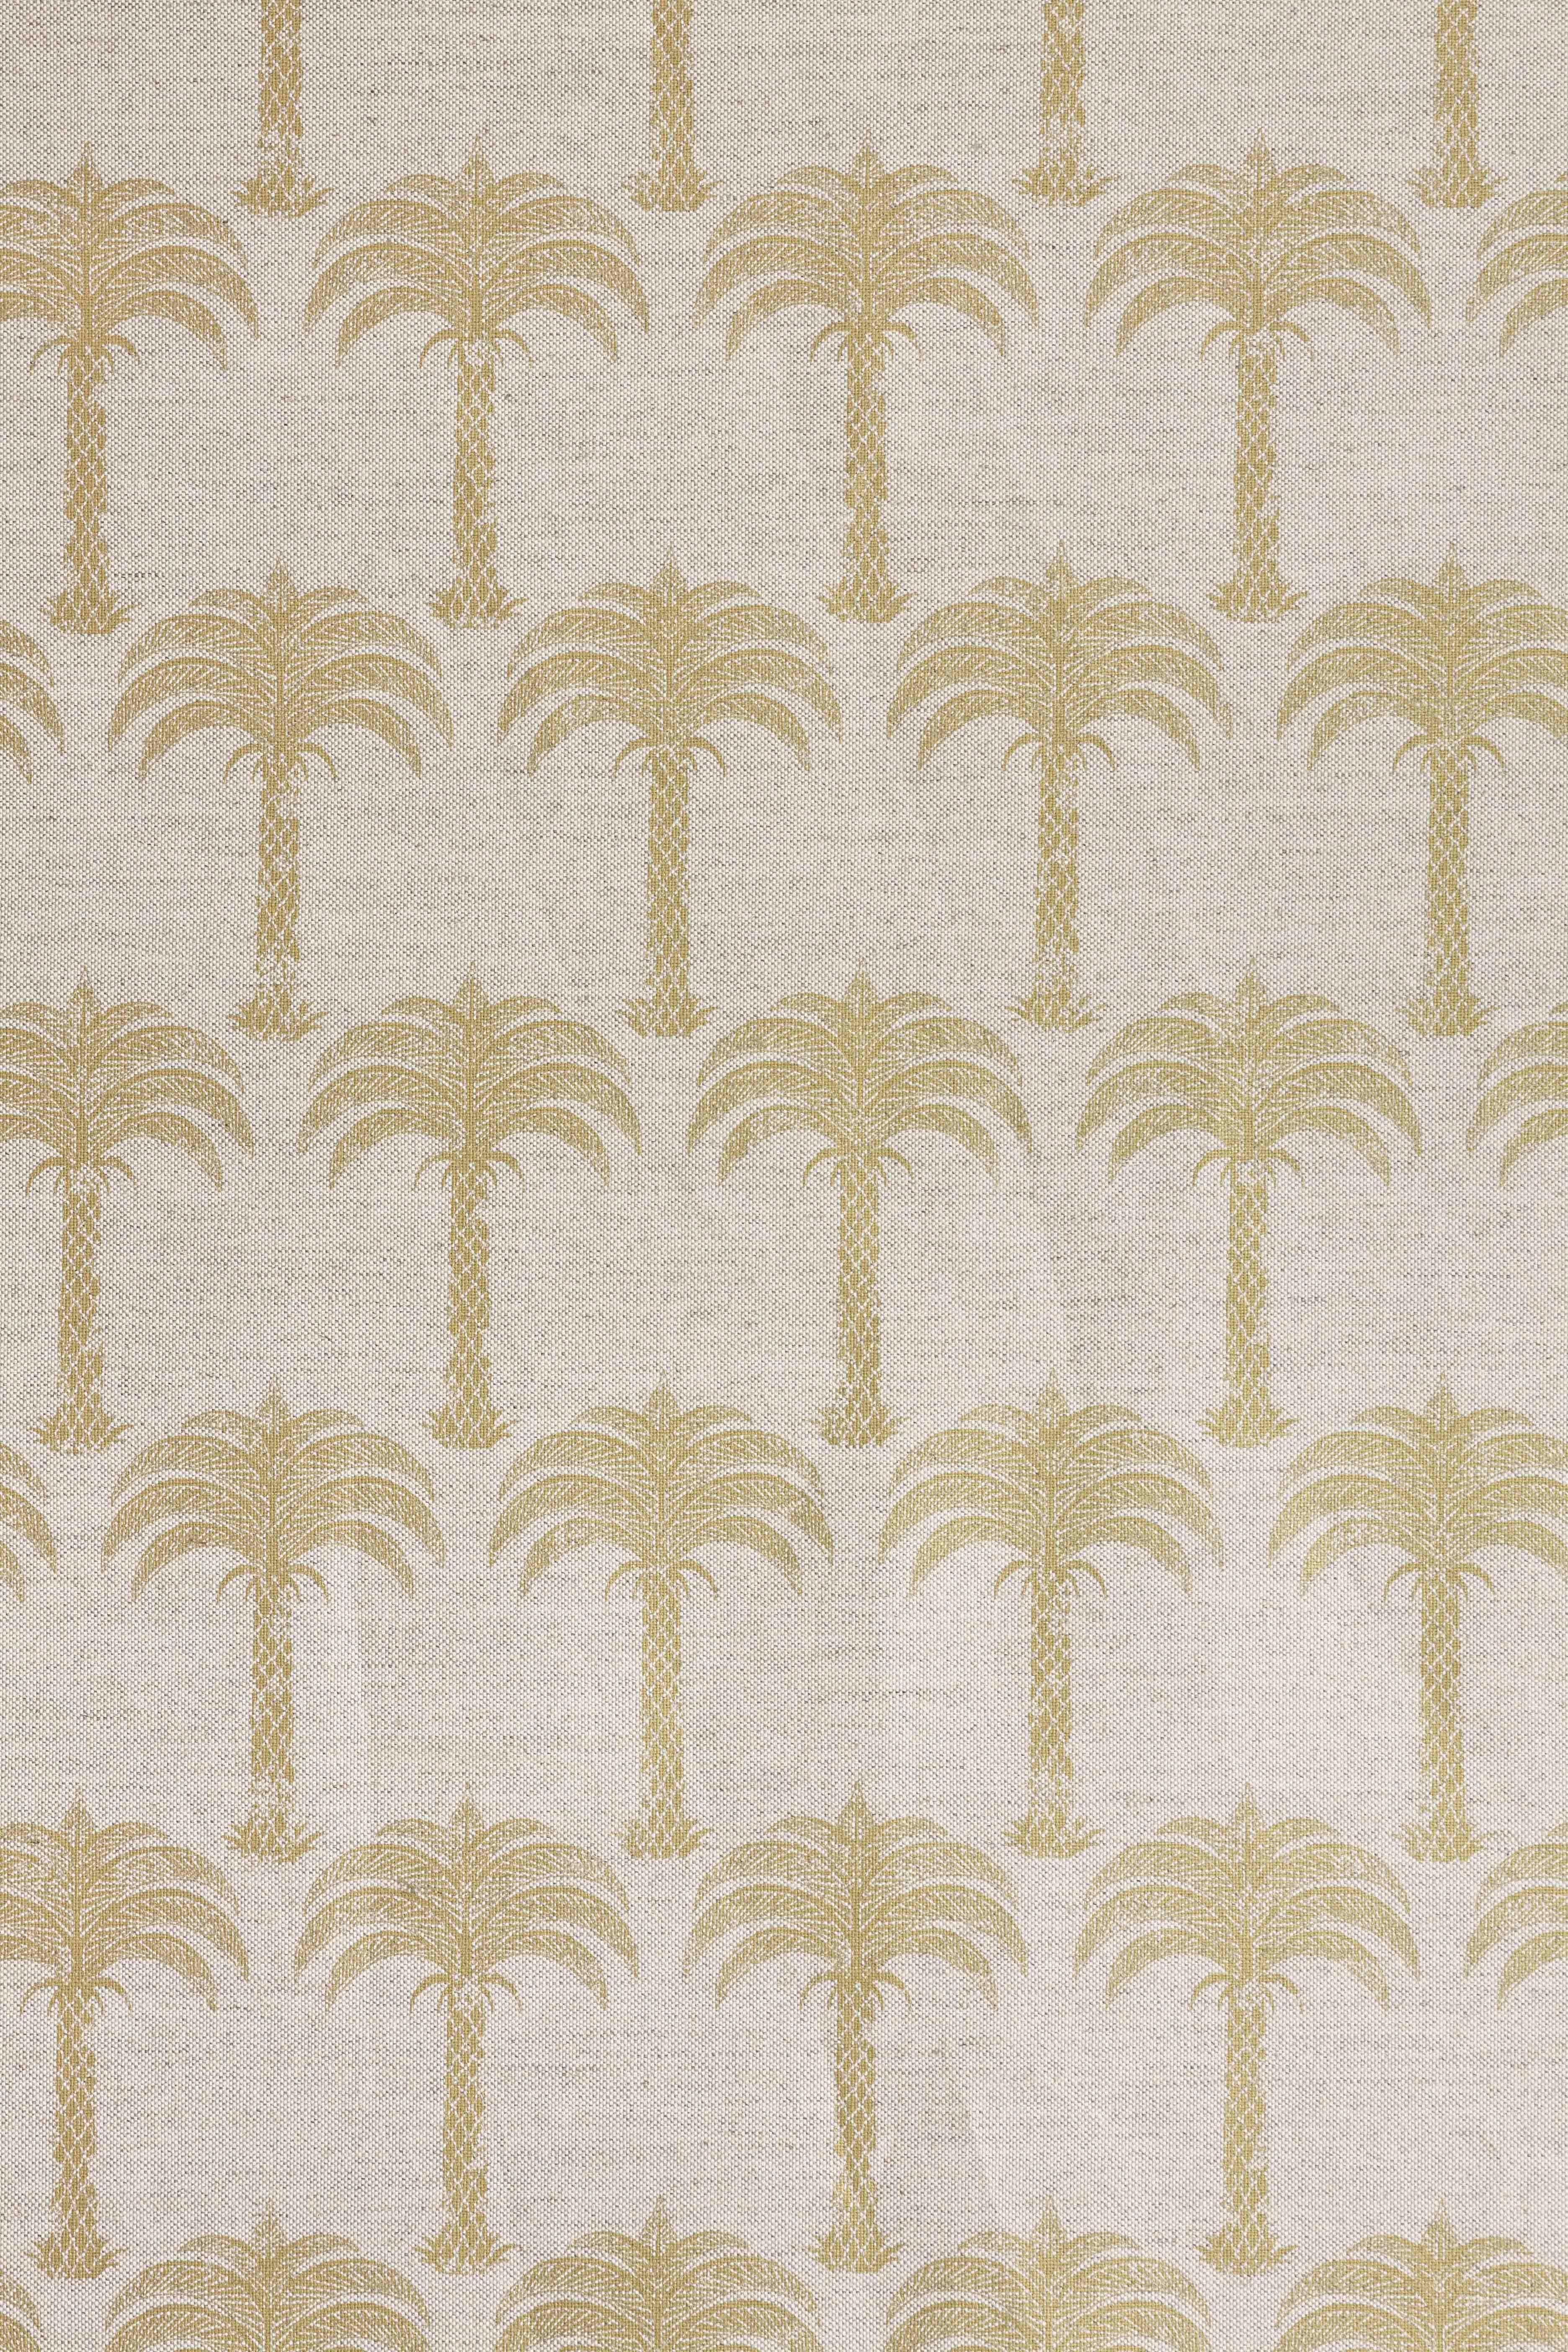 'Marrakech Palm' Contemporary, Traditional Fabric in Soft Gold For Sale 1